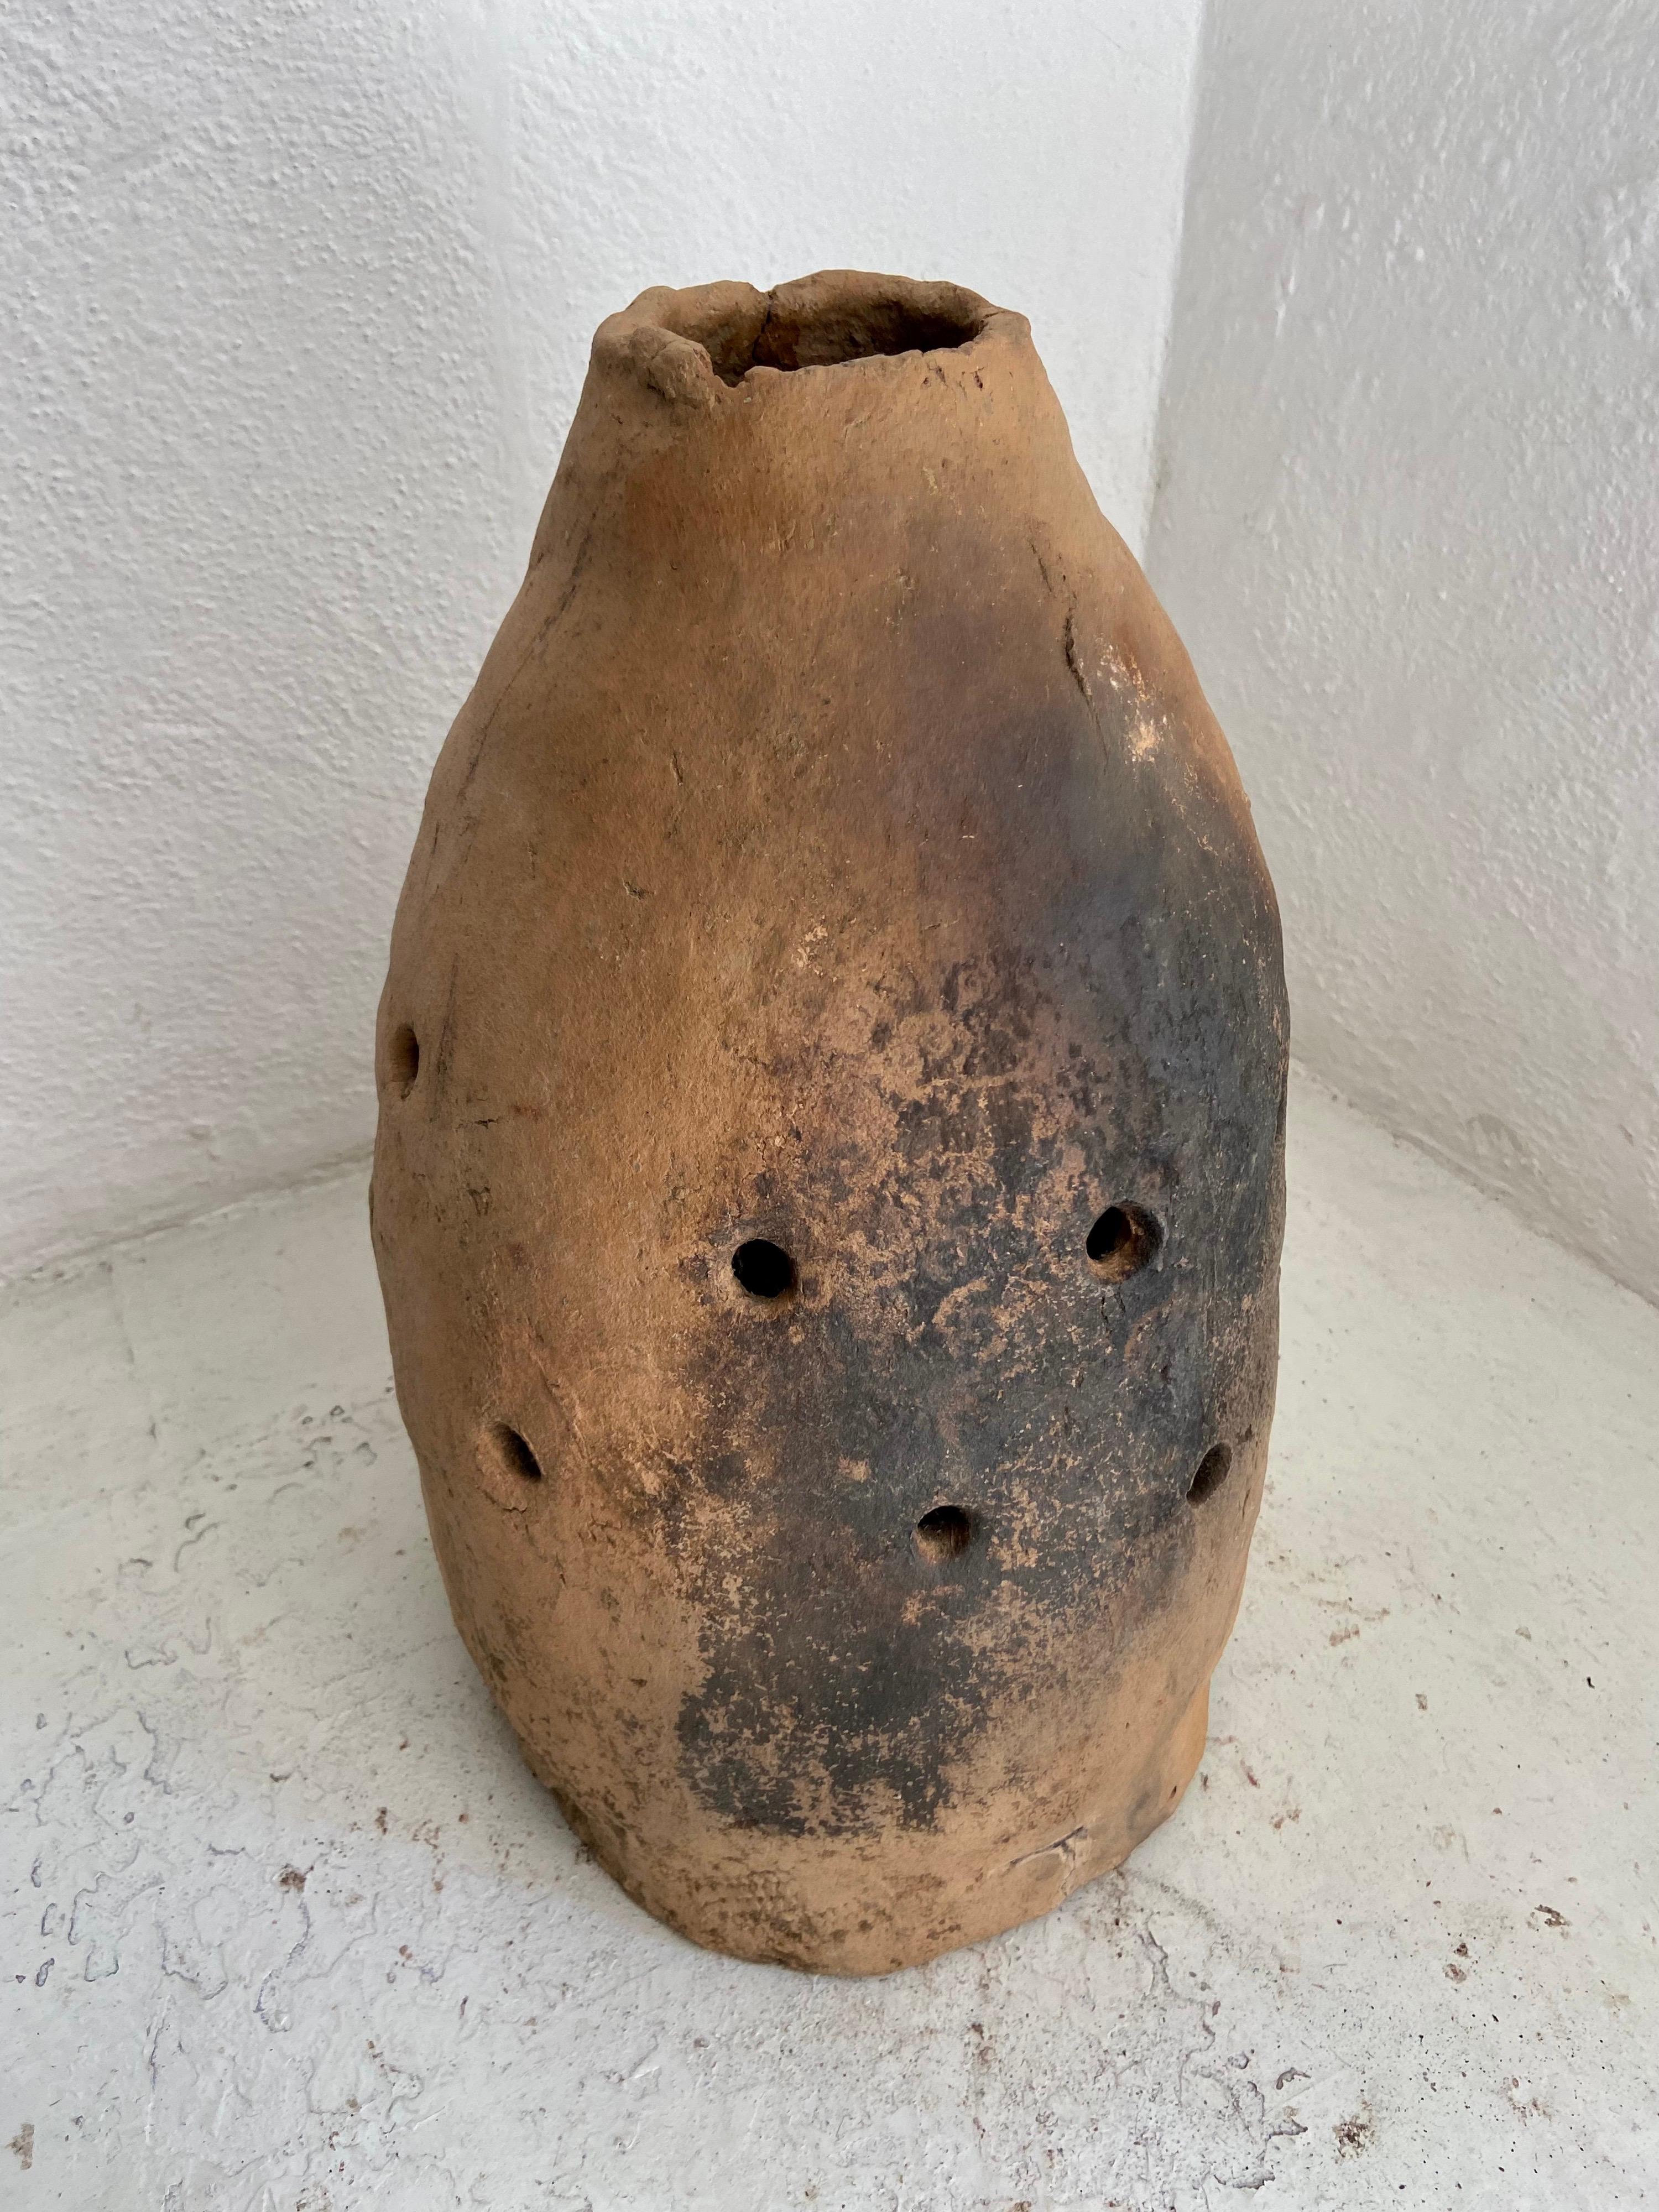 Fired Early 20th Century Terracotta Dome Heater from a Remote Mexican Village